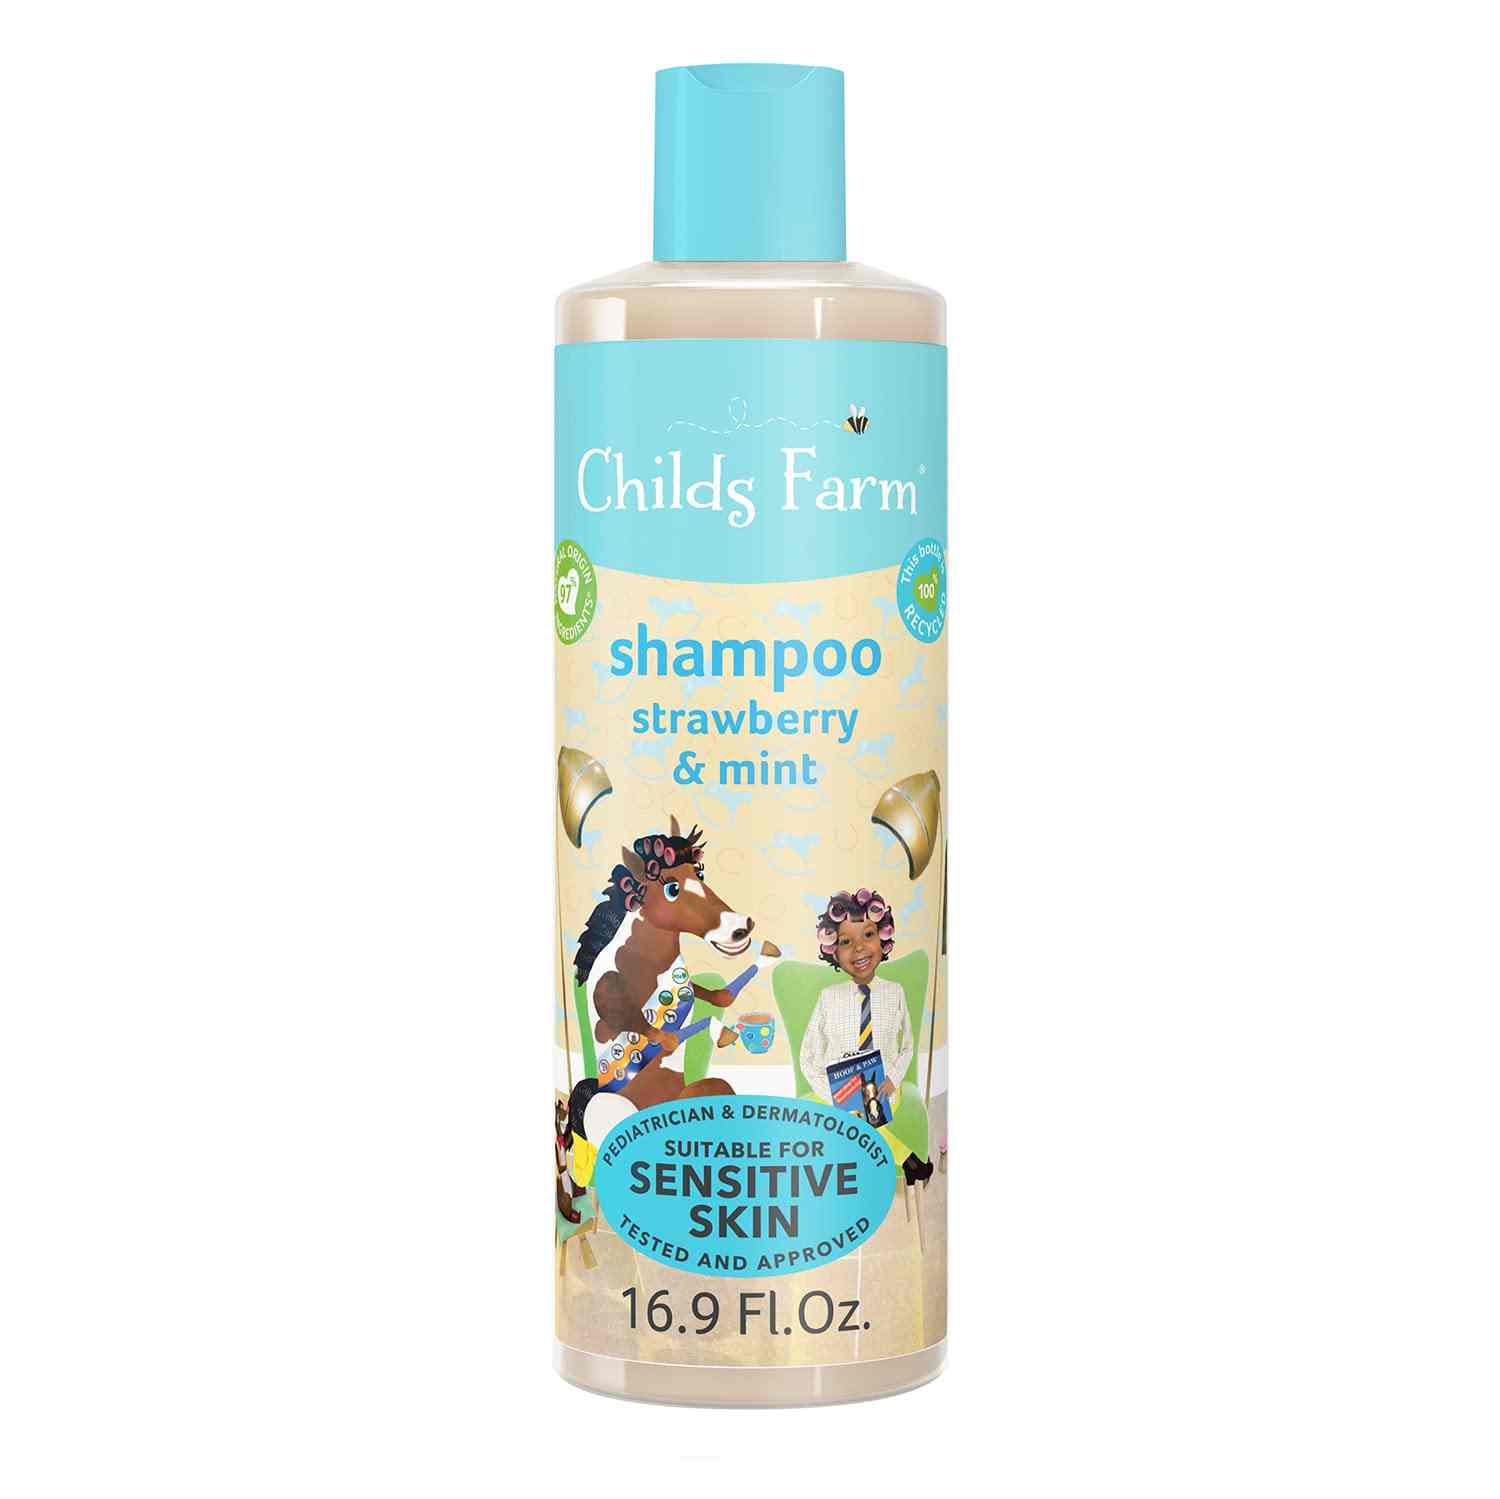 15 Best Natural Hair Products for Black Babies